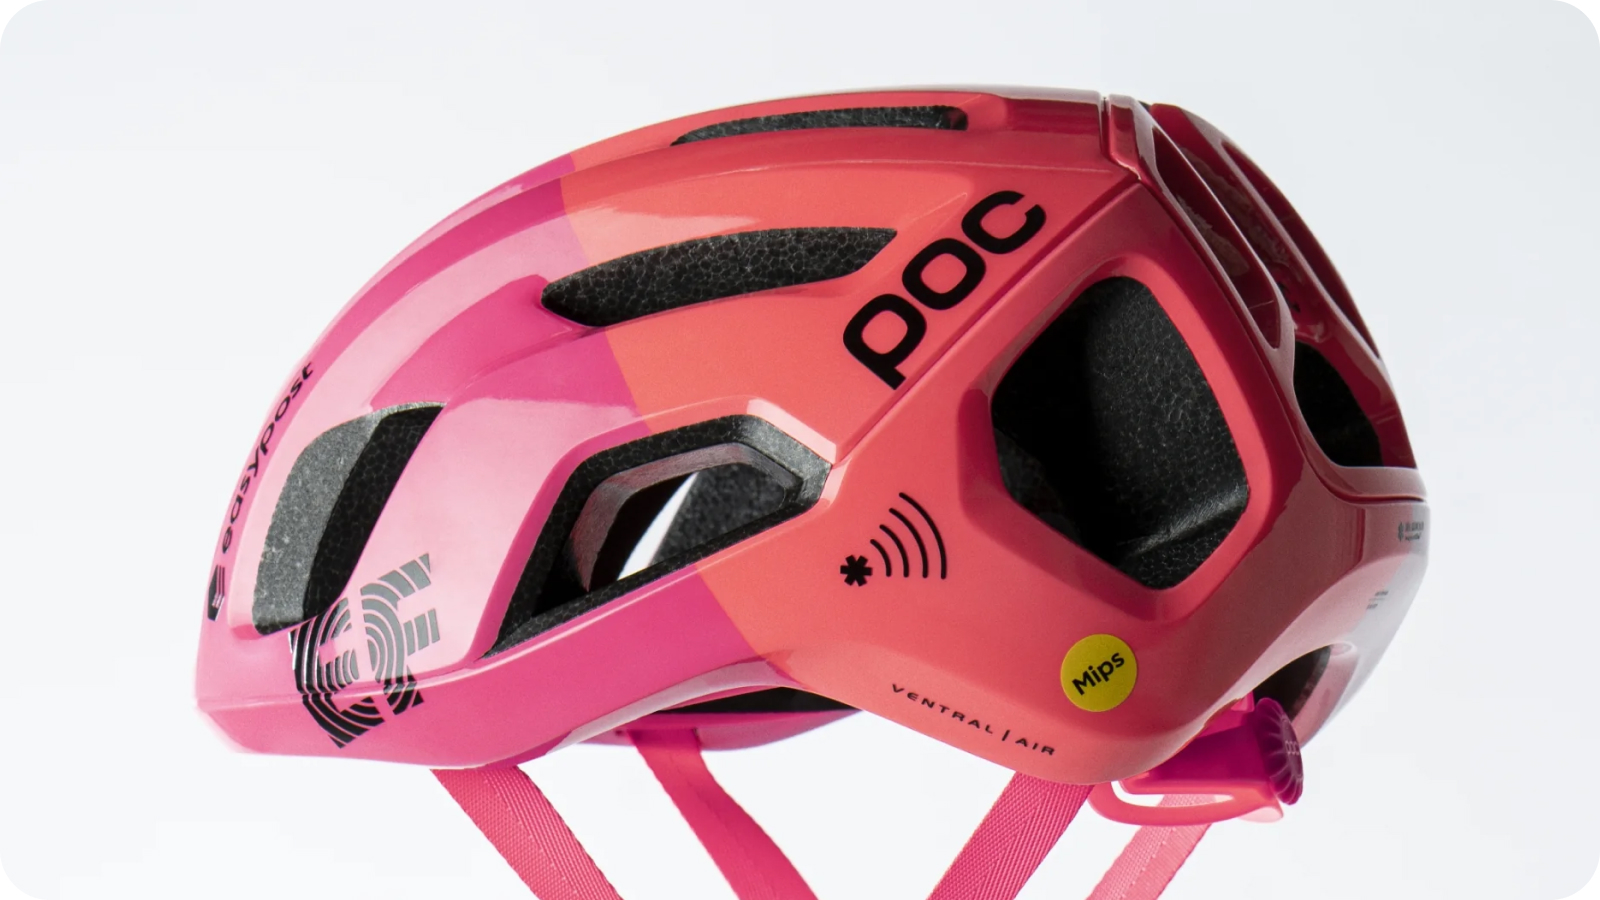 The POC Helmet: A Pinnacle of Safety and Performance